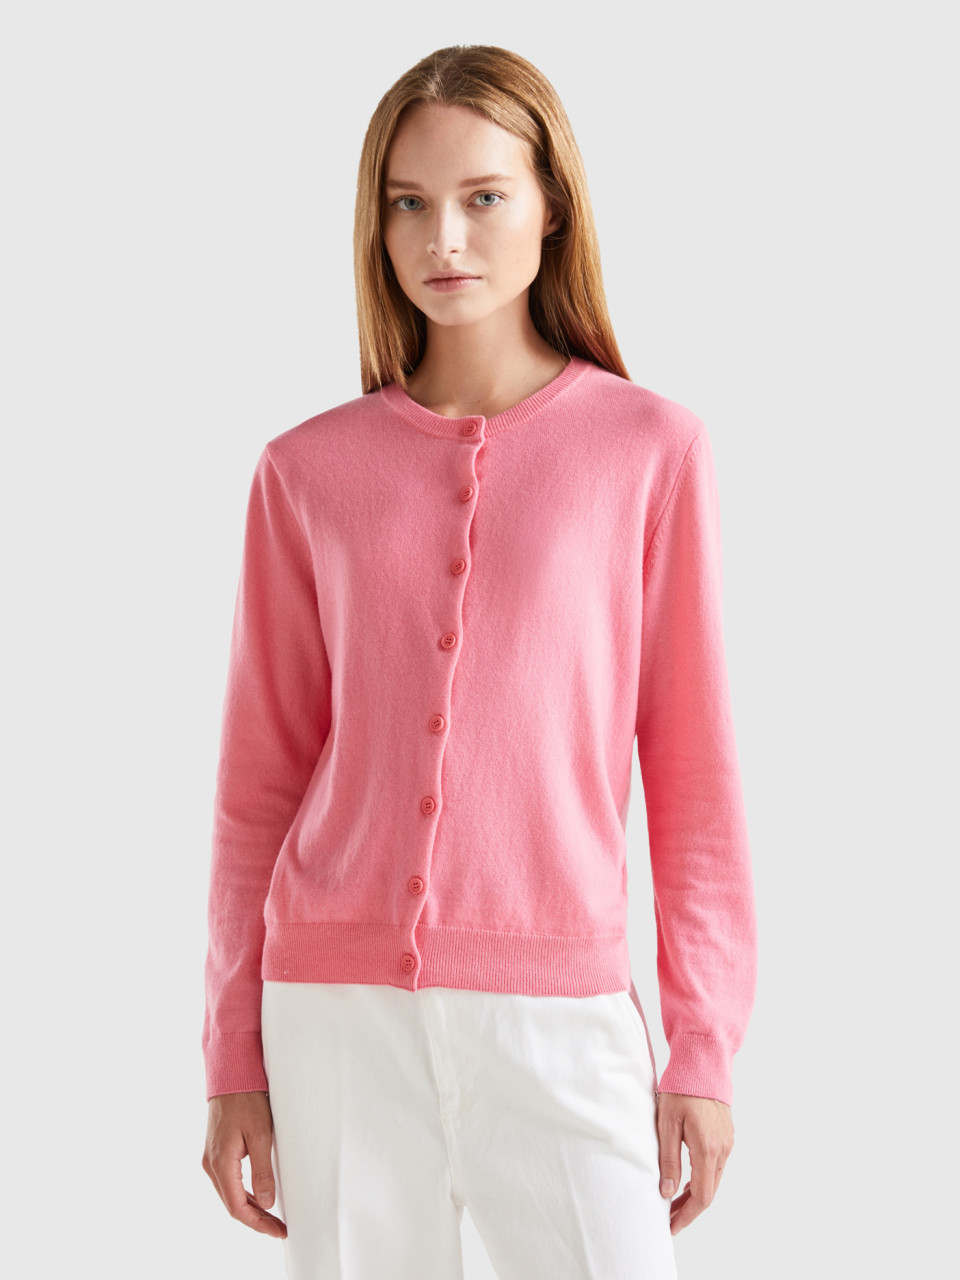 Benetton, Red Cardigan In Cashmere And Wool Blend, Pink, Women